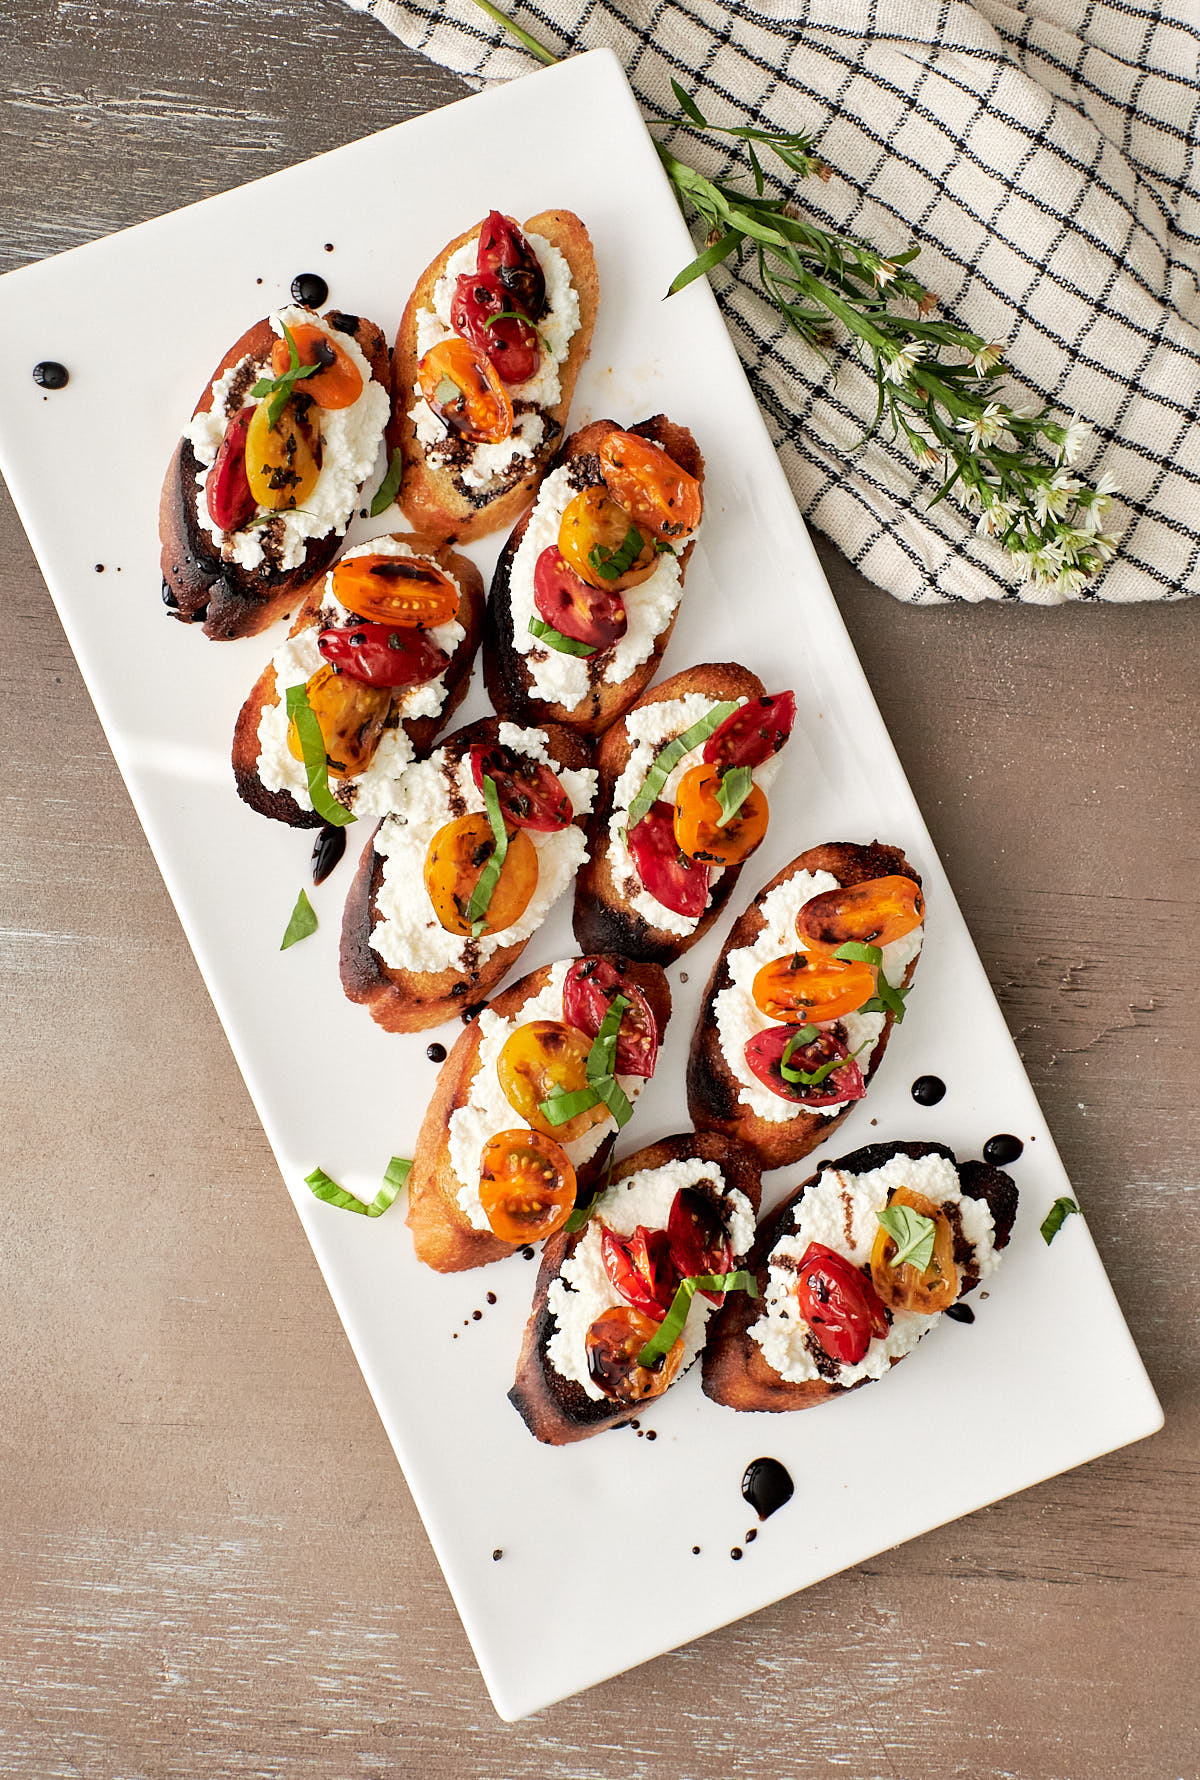 Toasted bread slices topped with ricotta and roasted tomatoes